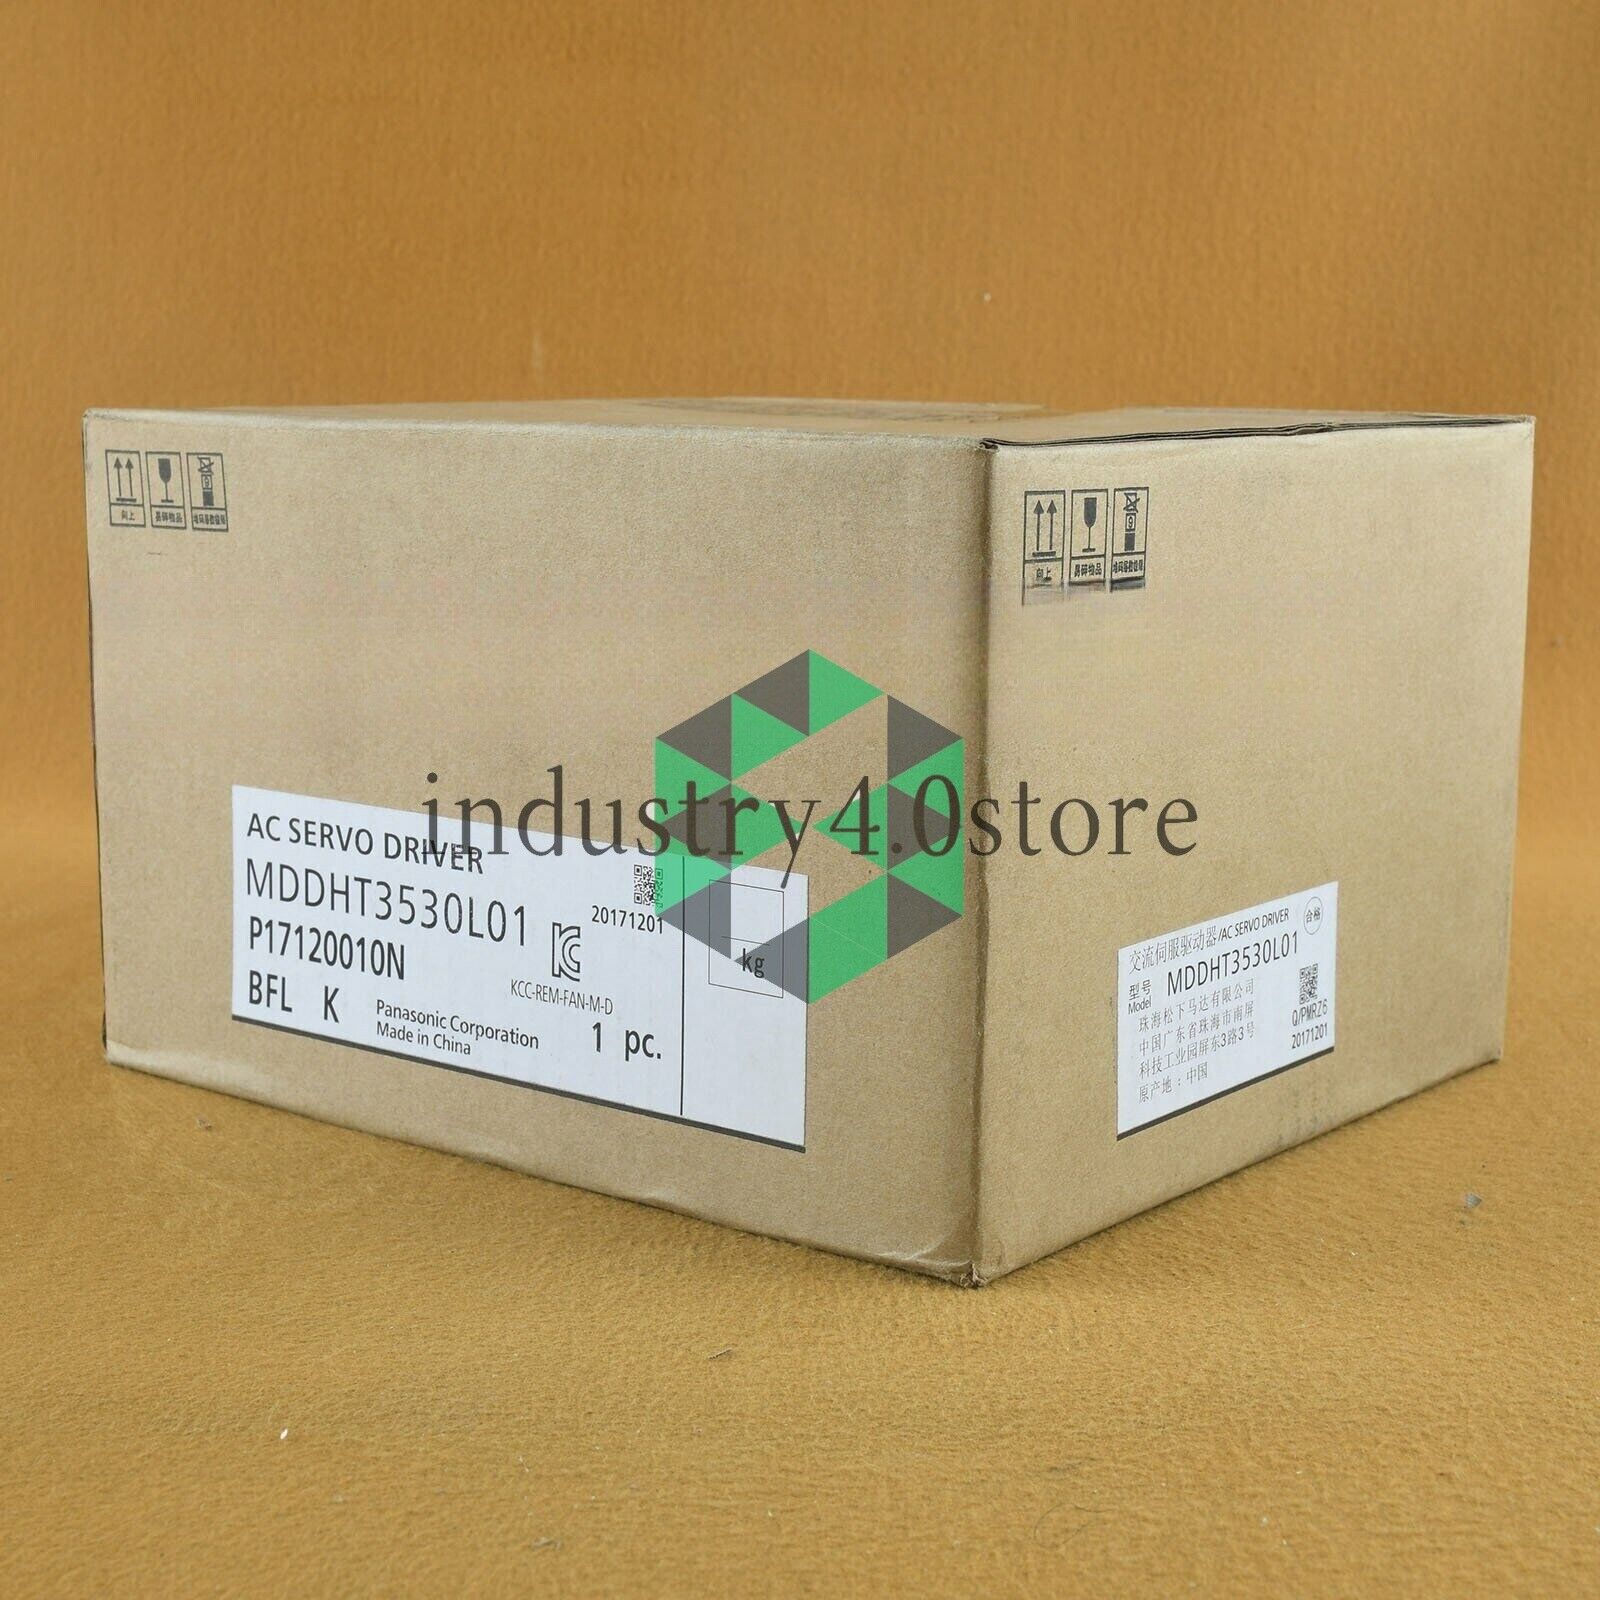 New In Box Panasonic MDDHT3530L01 AC Server Driver Fast Delivery 1 year warranty